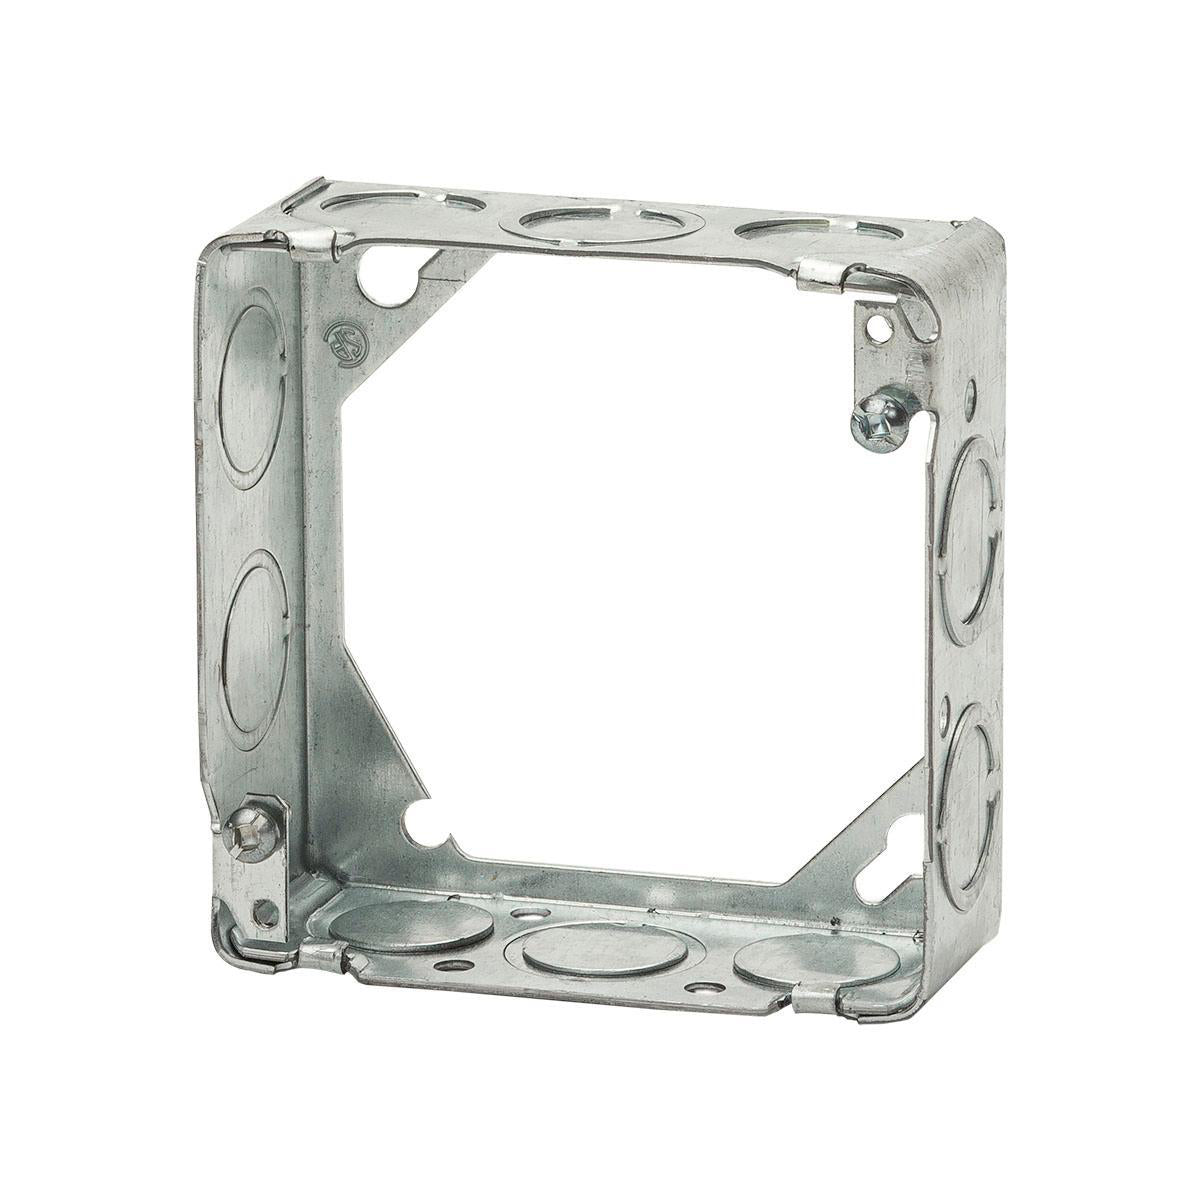 4" Square Extension Ring